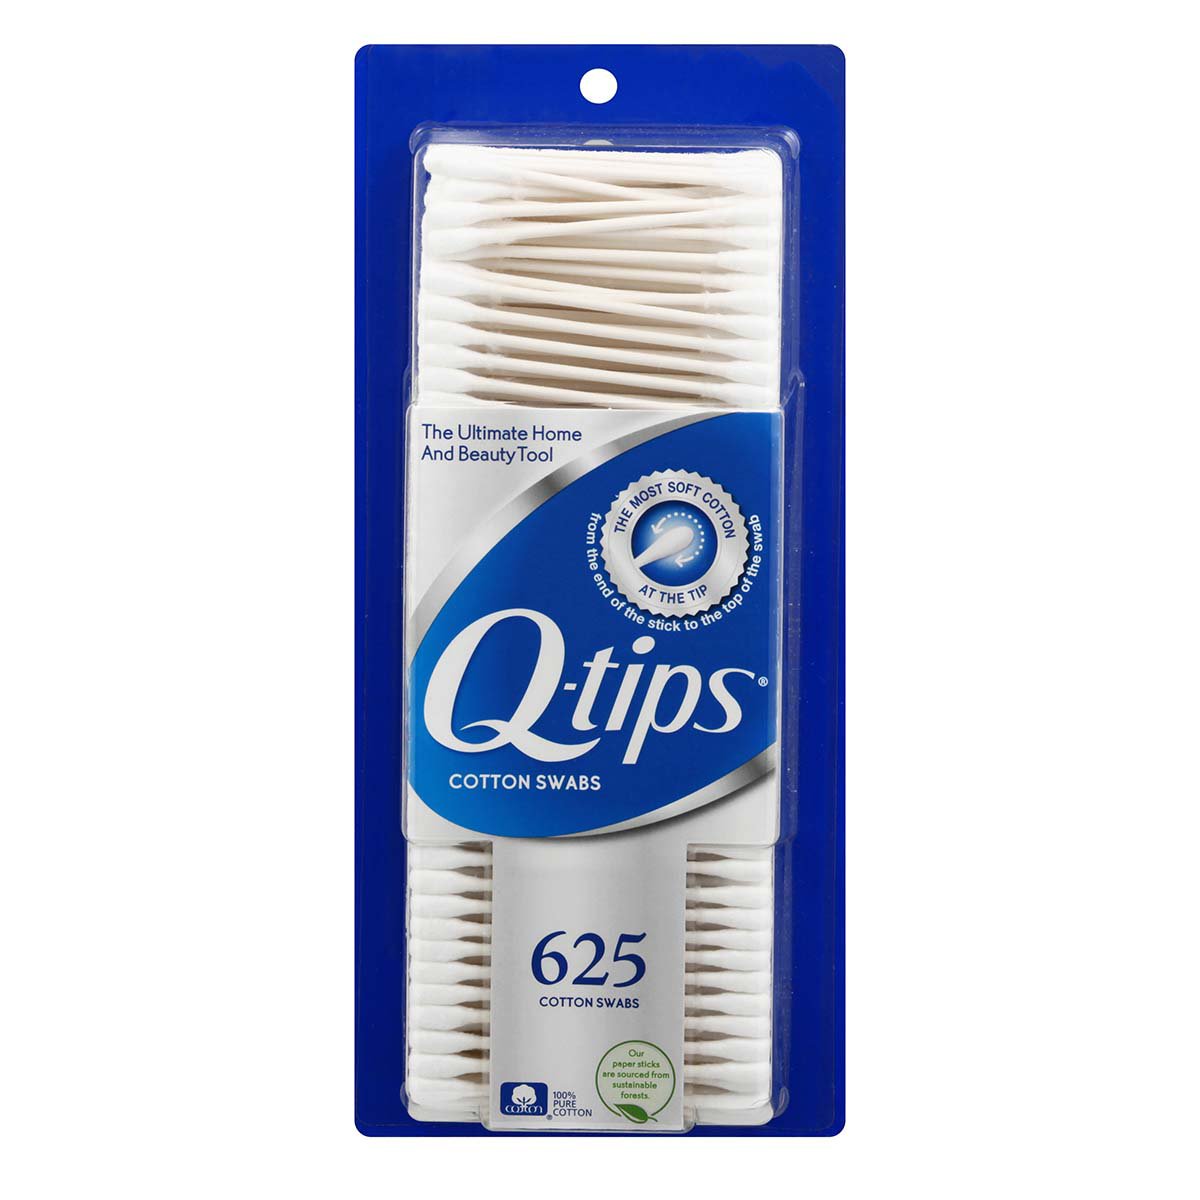 Hill Country Essentials Soft-Tipped Plastic Stick Cotton Swabs